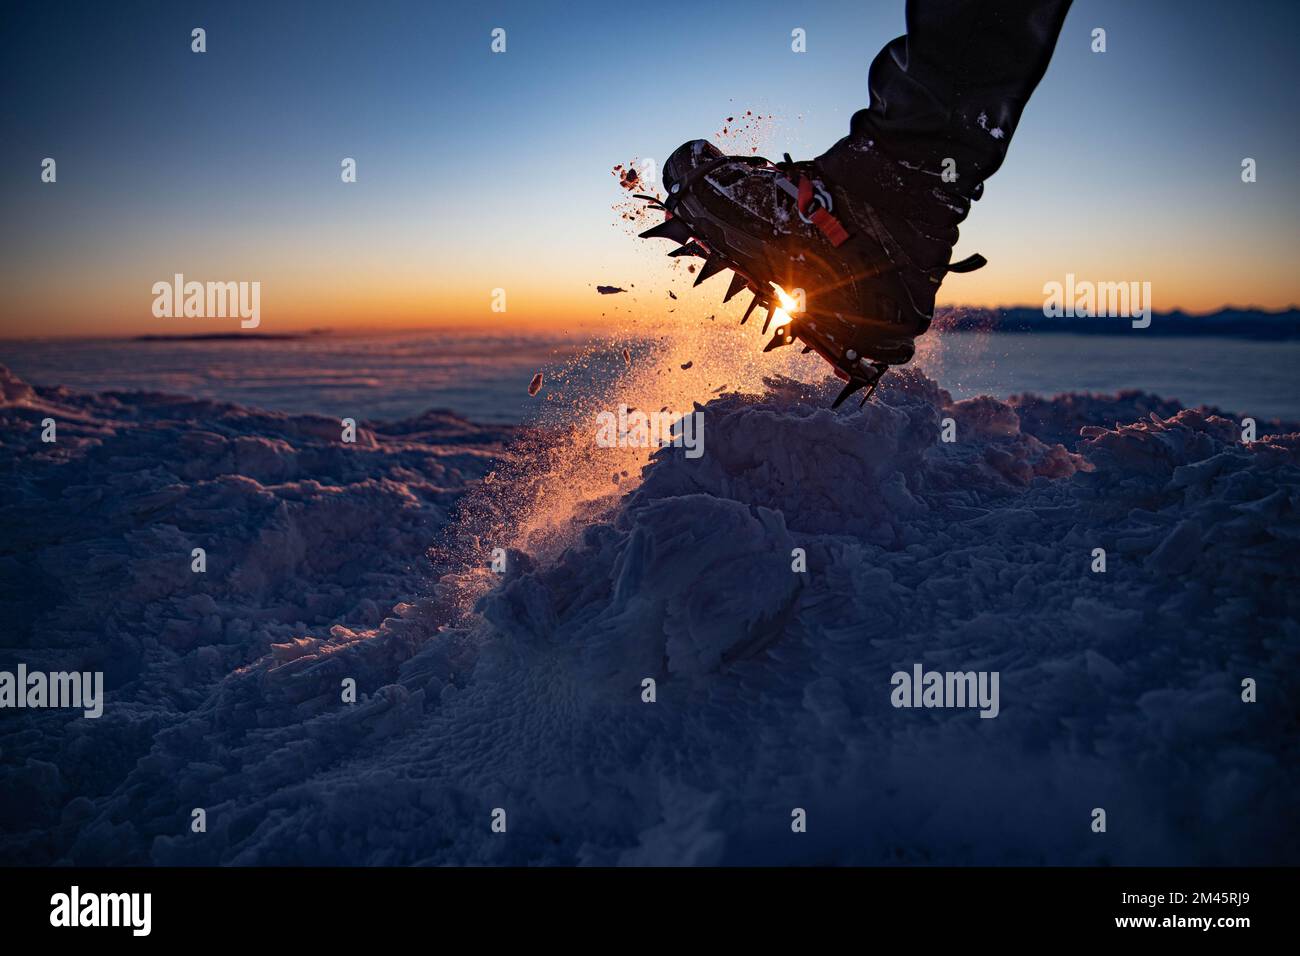 Man in crampon spike boots climbs to the top of a snowy mountain in winter.  Stock Photo